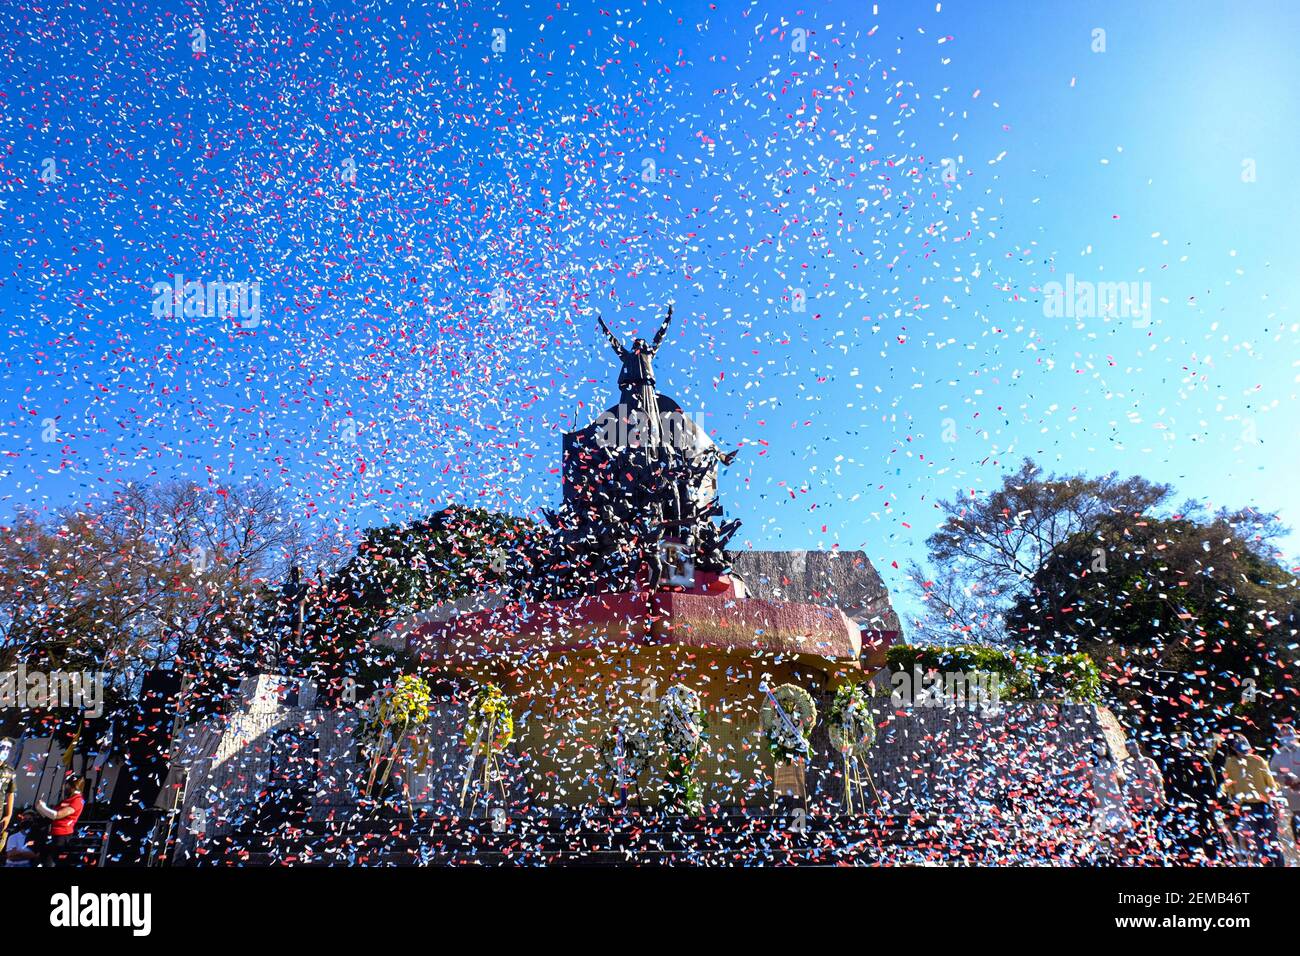 Manila, Philippines. 25th Feb, 2021. A confetti showers the facade of the People Power Monument as part of commemorating the 35th anniversary of EDSA Revolution in front of the People Power Monument. This year's theme is 'EDSA 2021: Kapayapaan, Paghilom, Pagbangon (Peace, Healing, Recovery), to reflect on the national efforts in the face of COVID-19 pandemic. Manila, Philippines. Credit: Majority World CIC/Alamy Live News Stock Photo